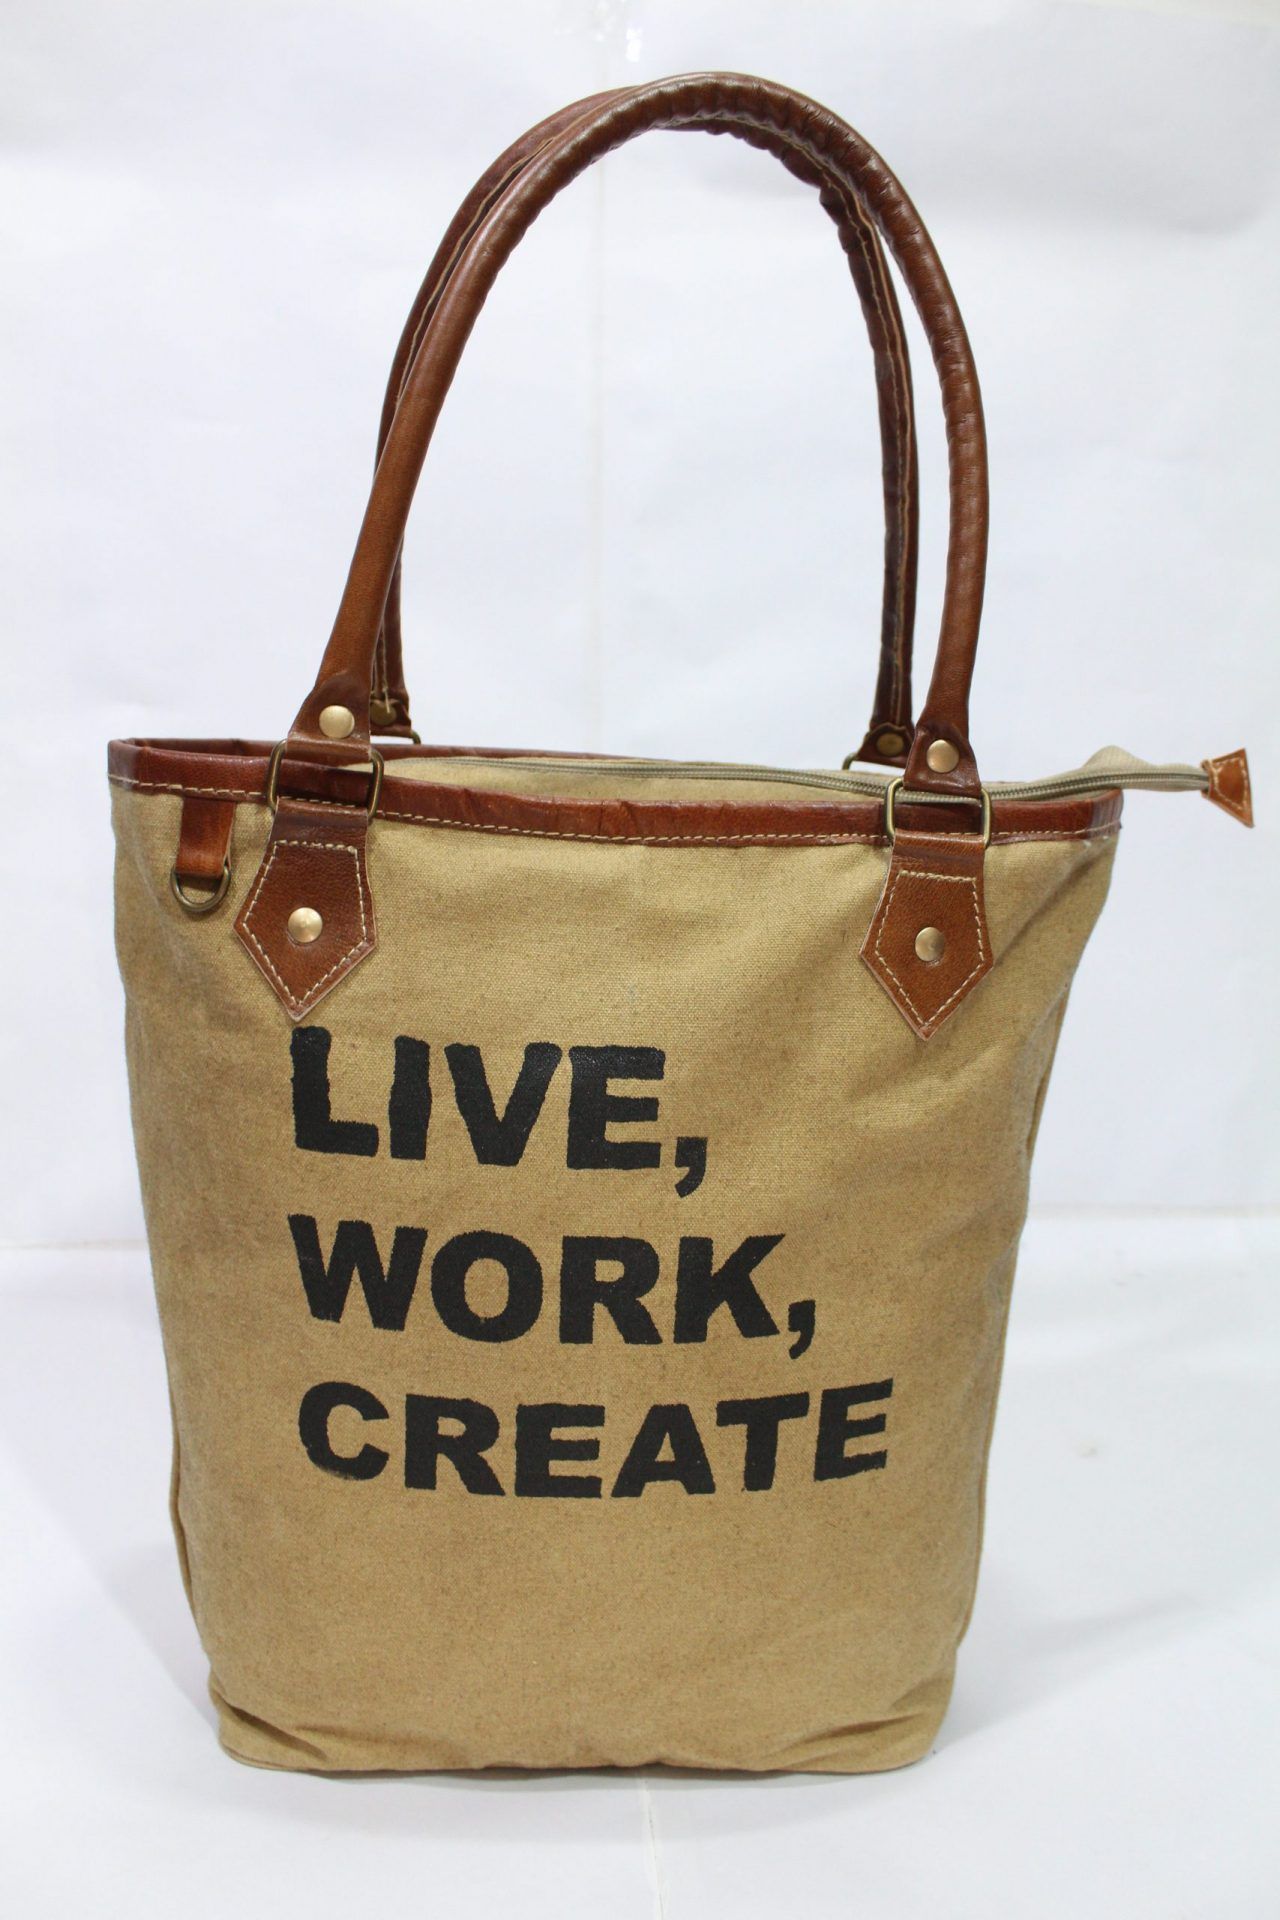 Women's Tote Bags, Canvas, Leather, & More